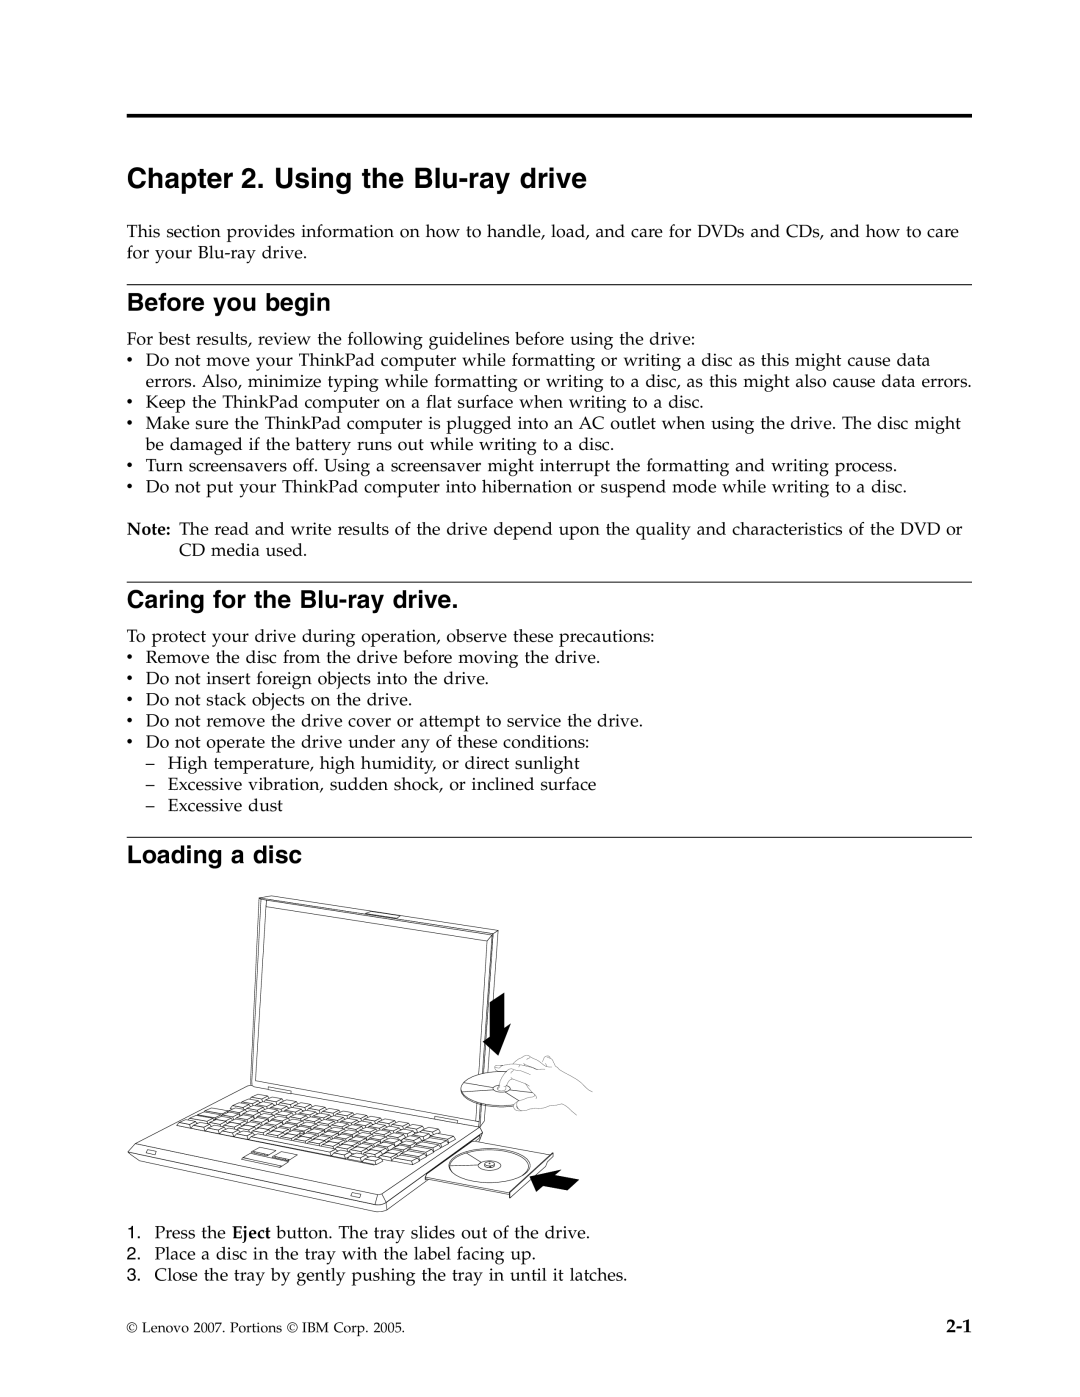 Lenovo 43N3201 manual Using the Blu-raydrive, Before you begin, Caring for the Blu-raydrive, Loading a disc 